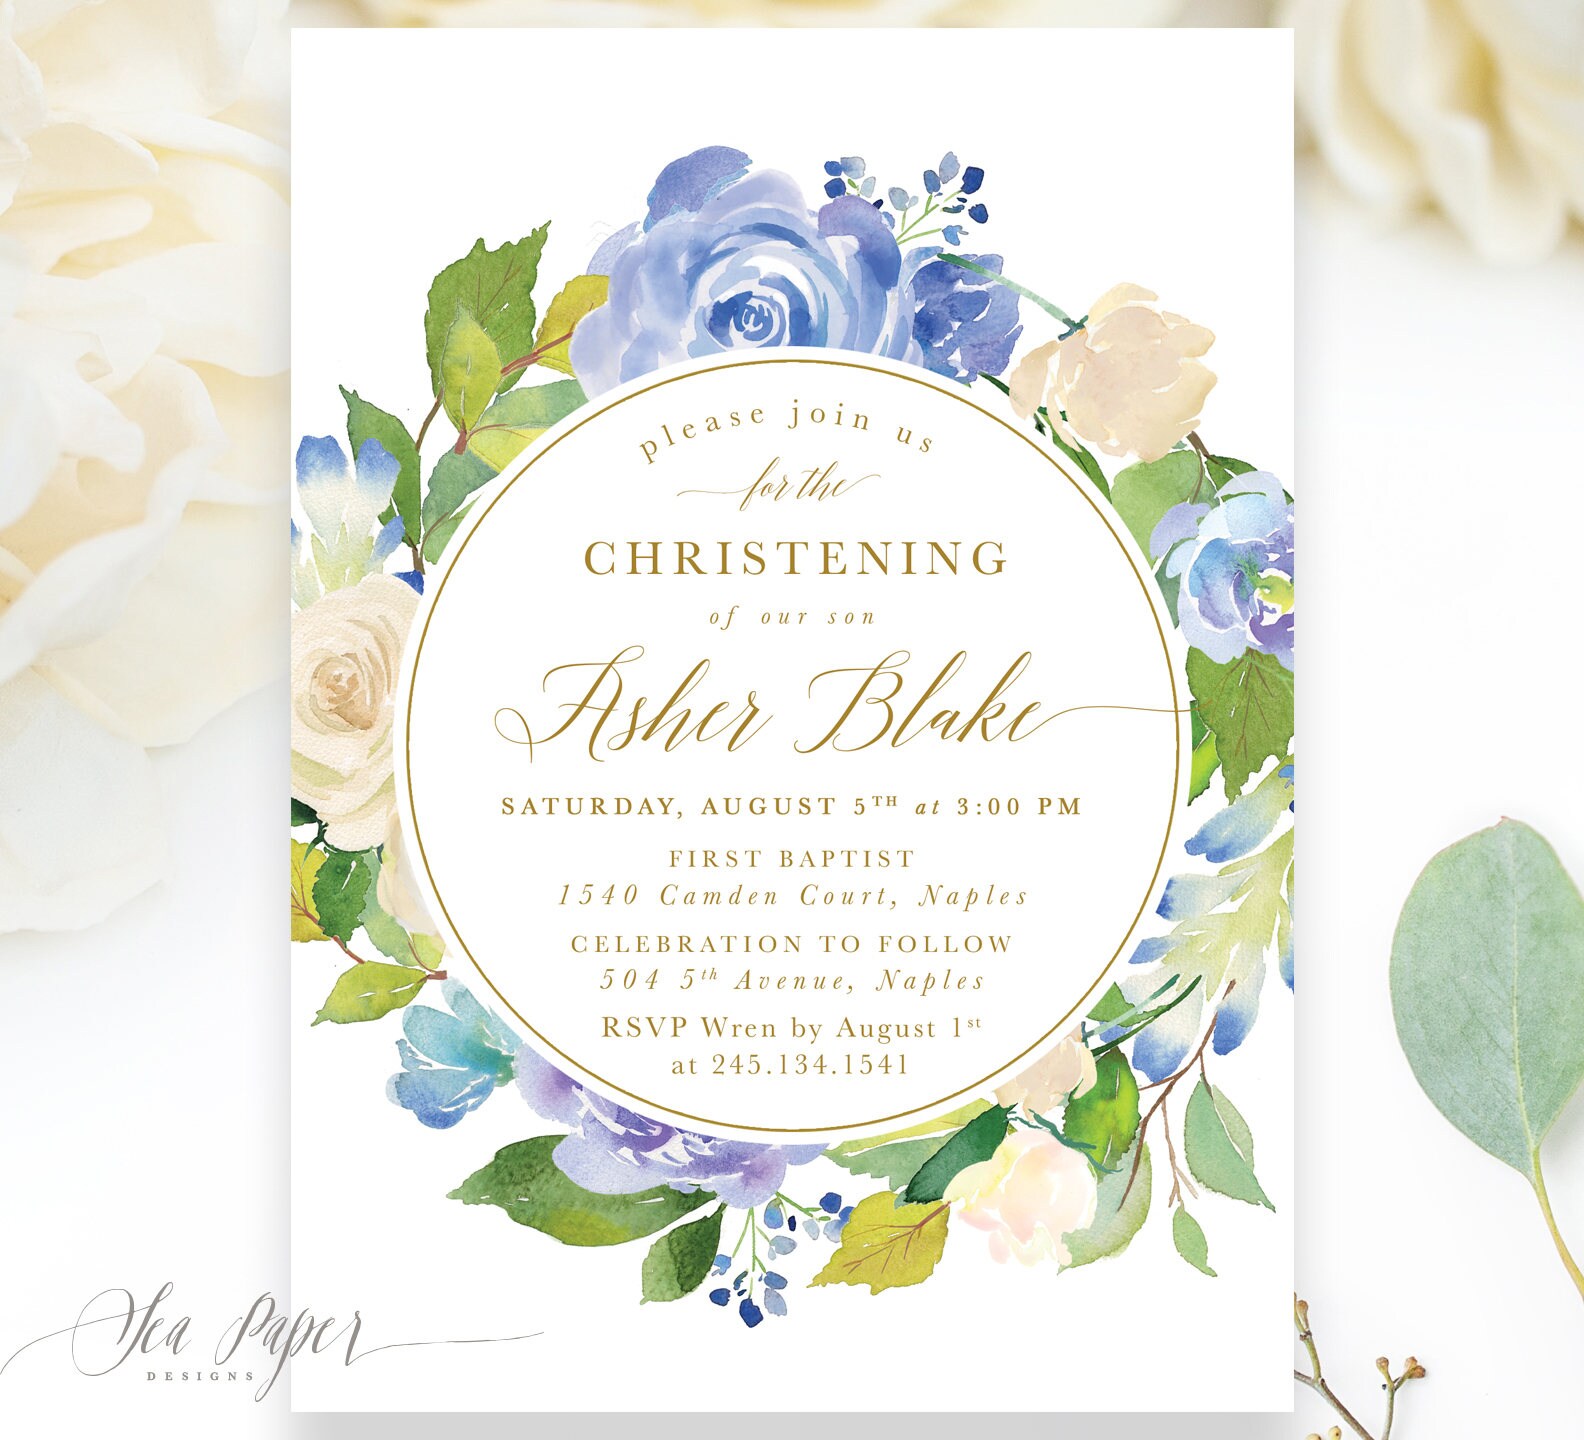 Boy Christening Invitation, Invitation For A Boy, Formal Blue Rose Florals & Greenery, Printed Or Printable - Asher